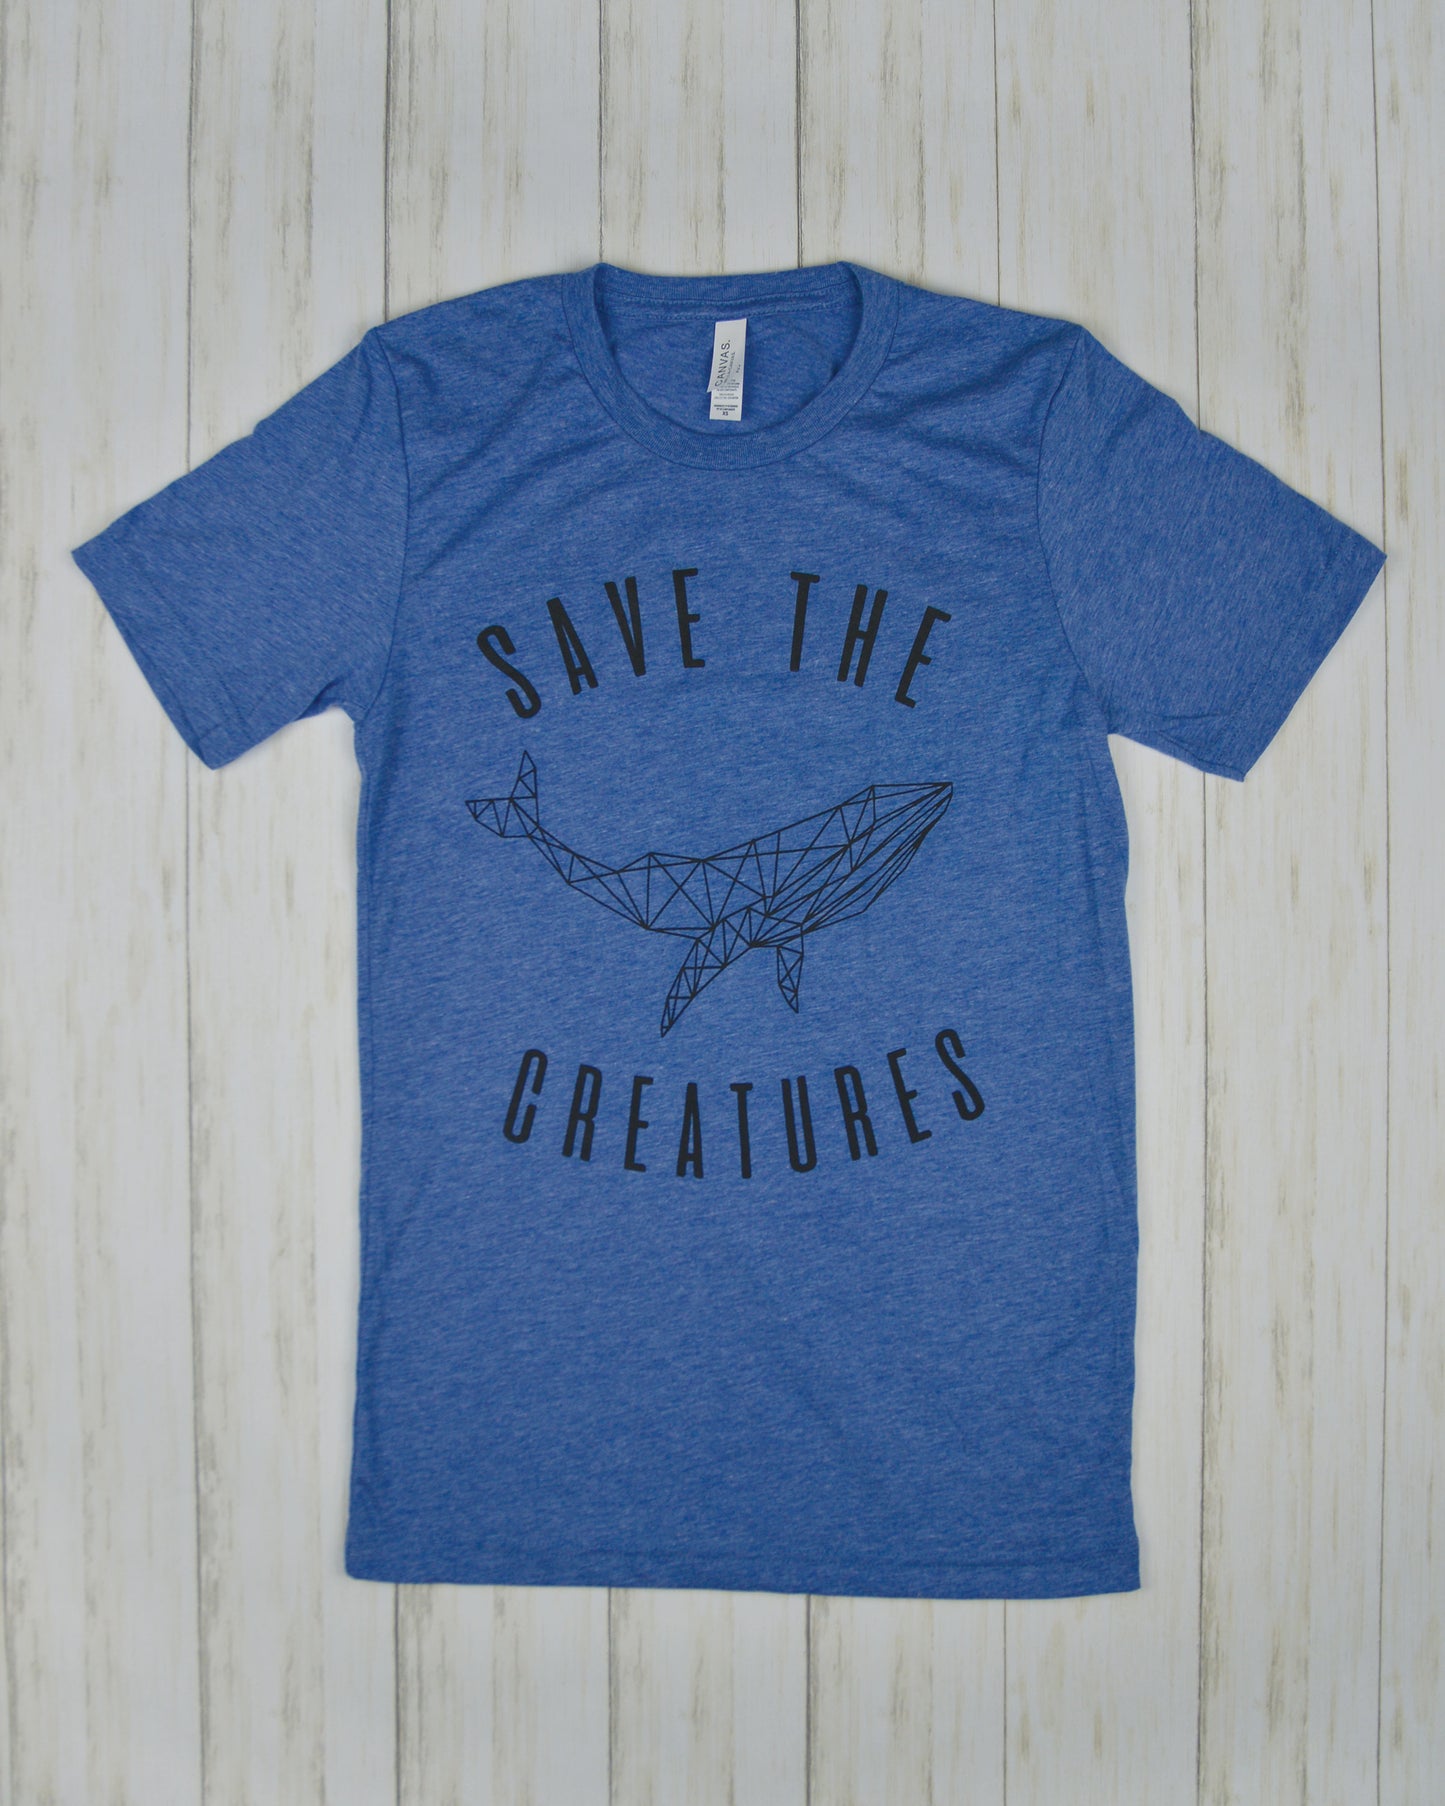 SAVE THE CREATURES | WHALE Tee